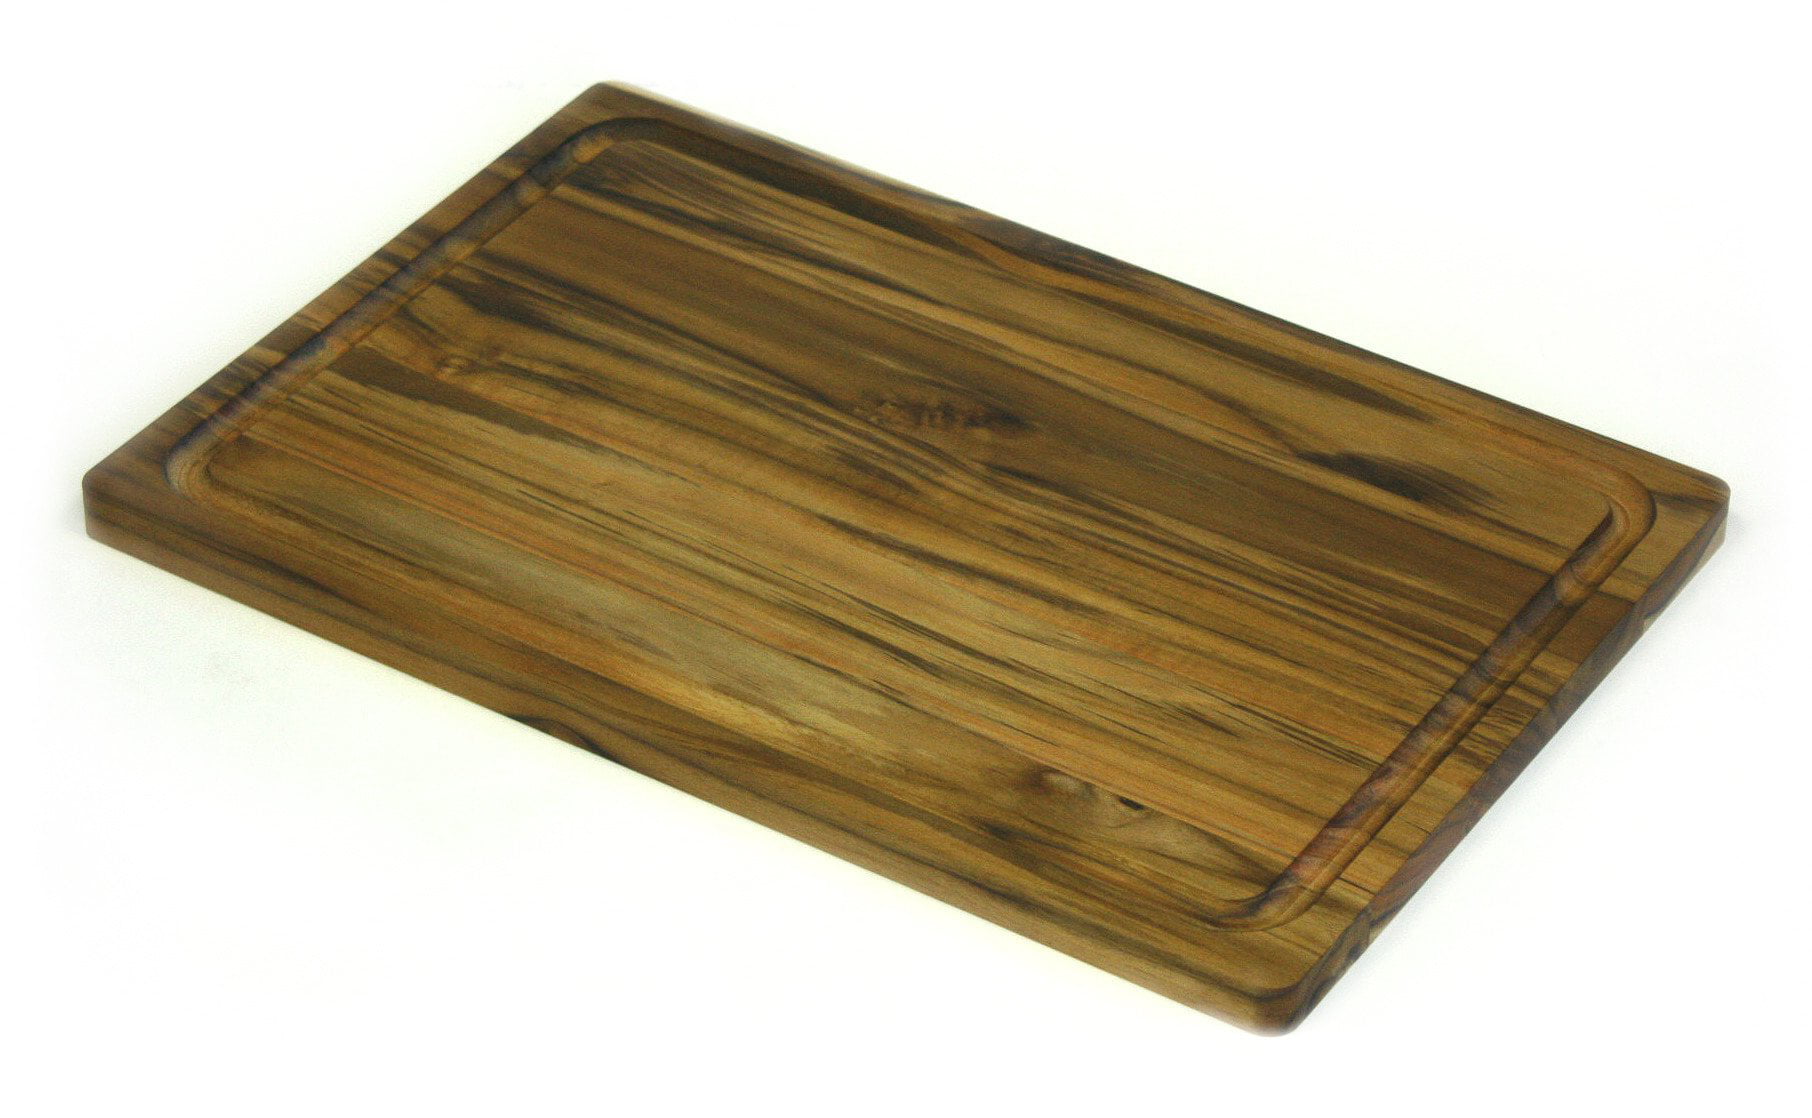 Large Reversible Thick Acacia Wood Cutting Board 16x12x1.5 With Juice Groove 